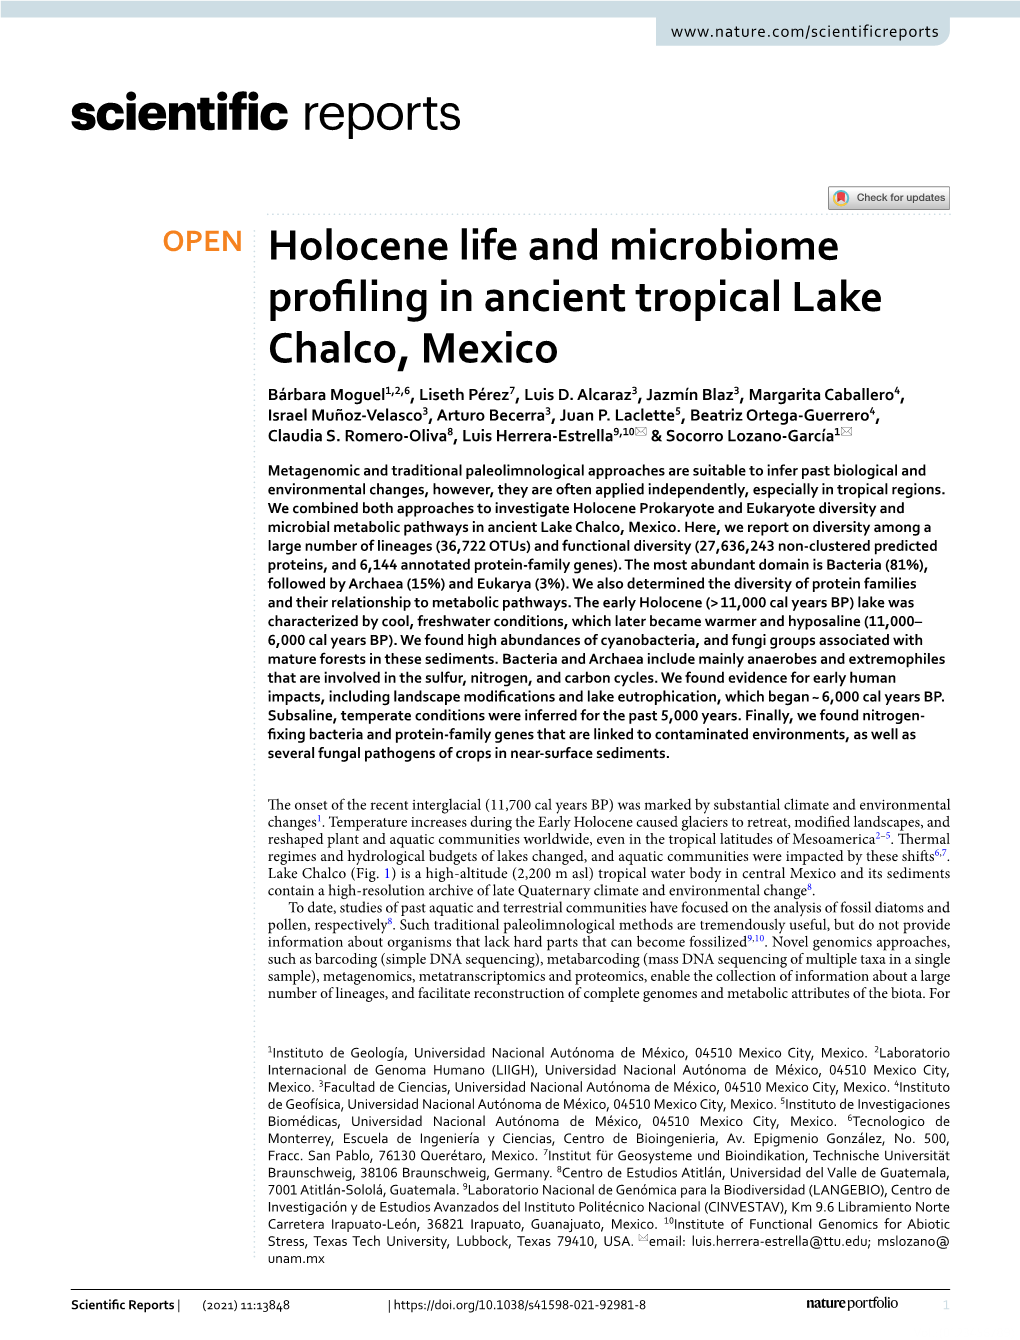 Holocene Life and Microbiome Profiling in Ancient Tropical Lake